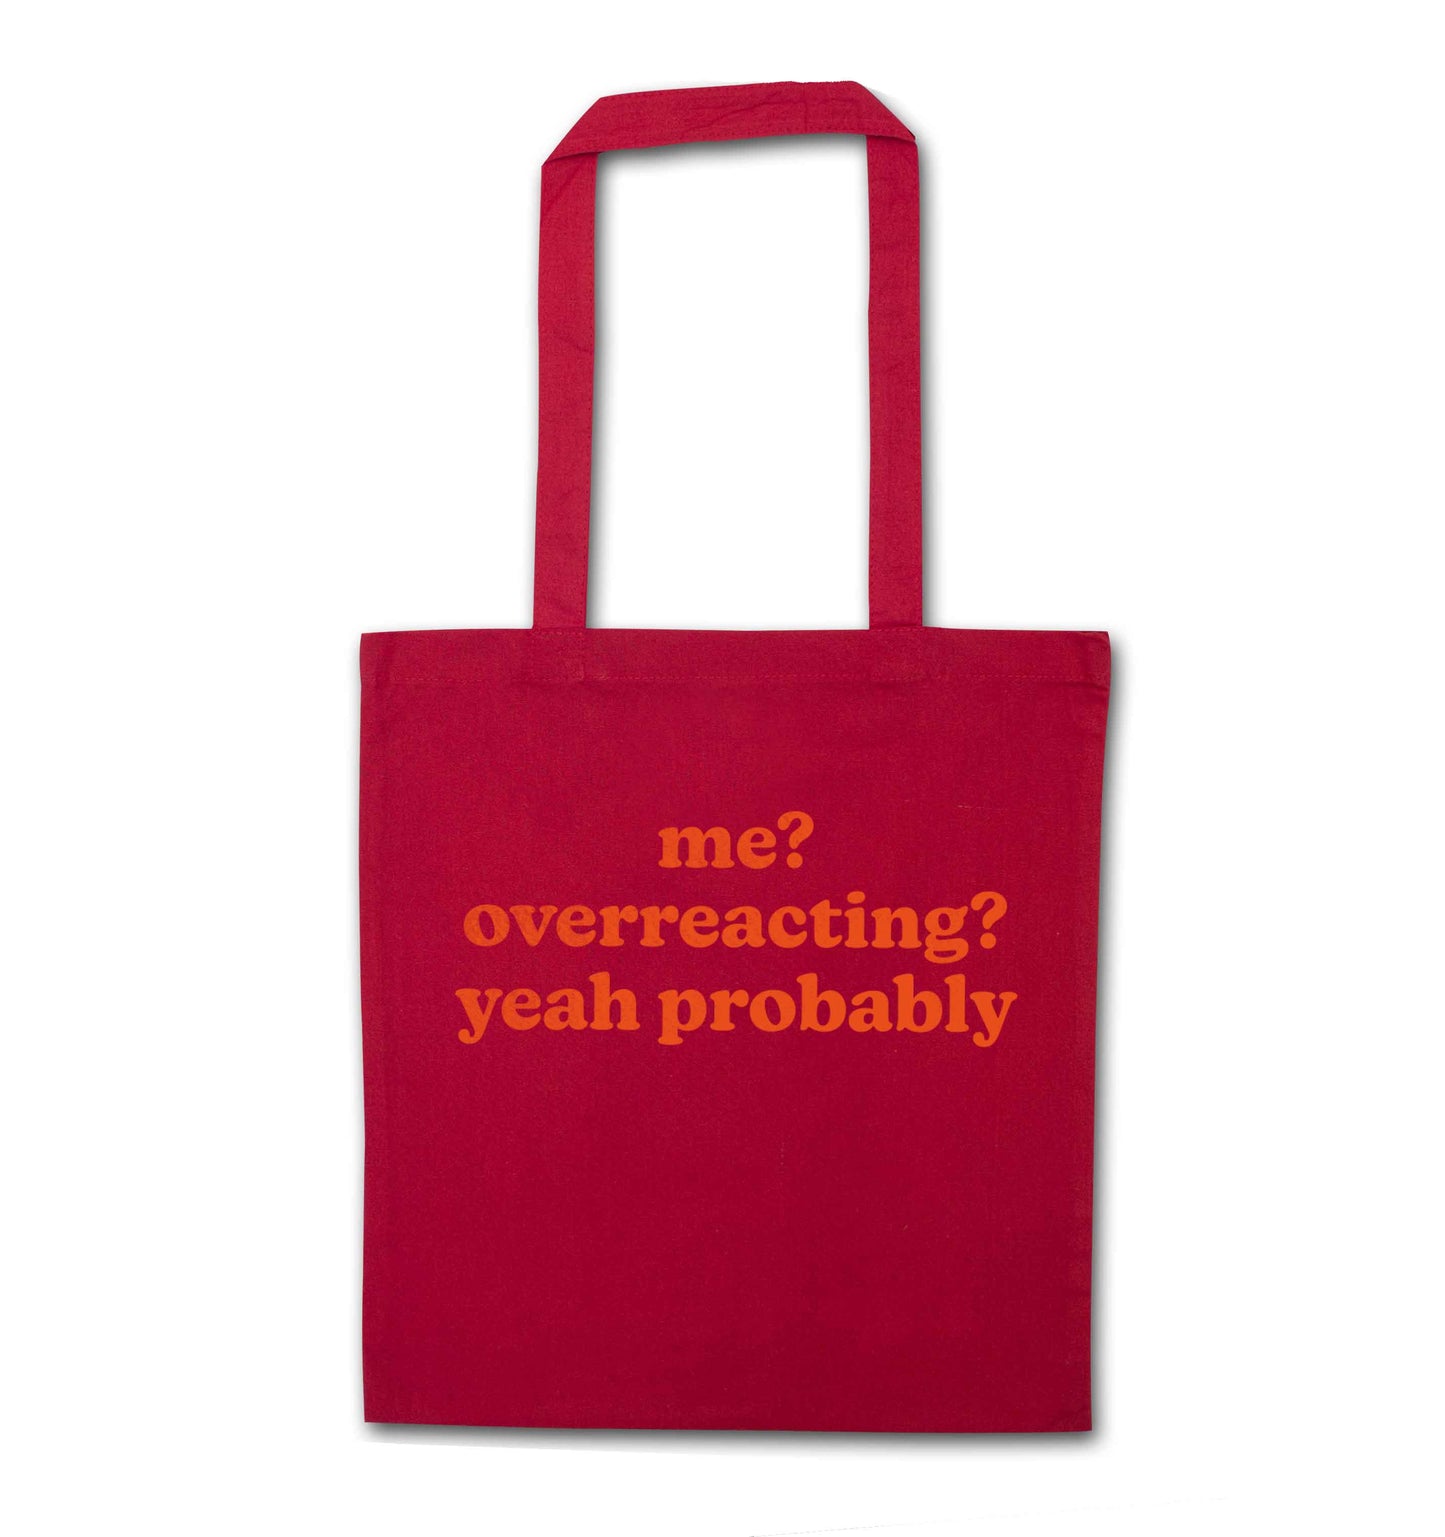 Me? Overreacting? Yeah probably red tote bag